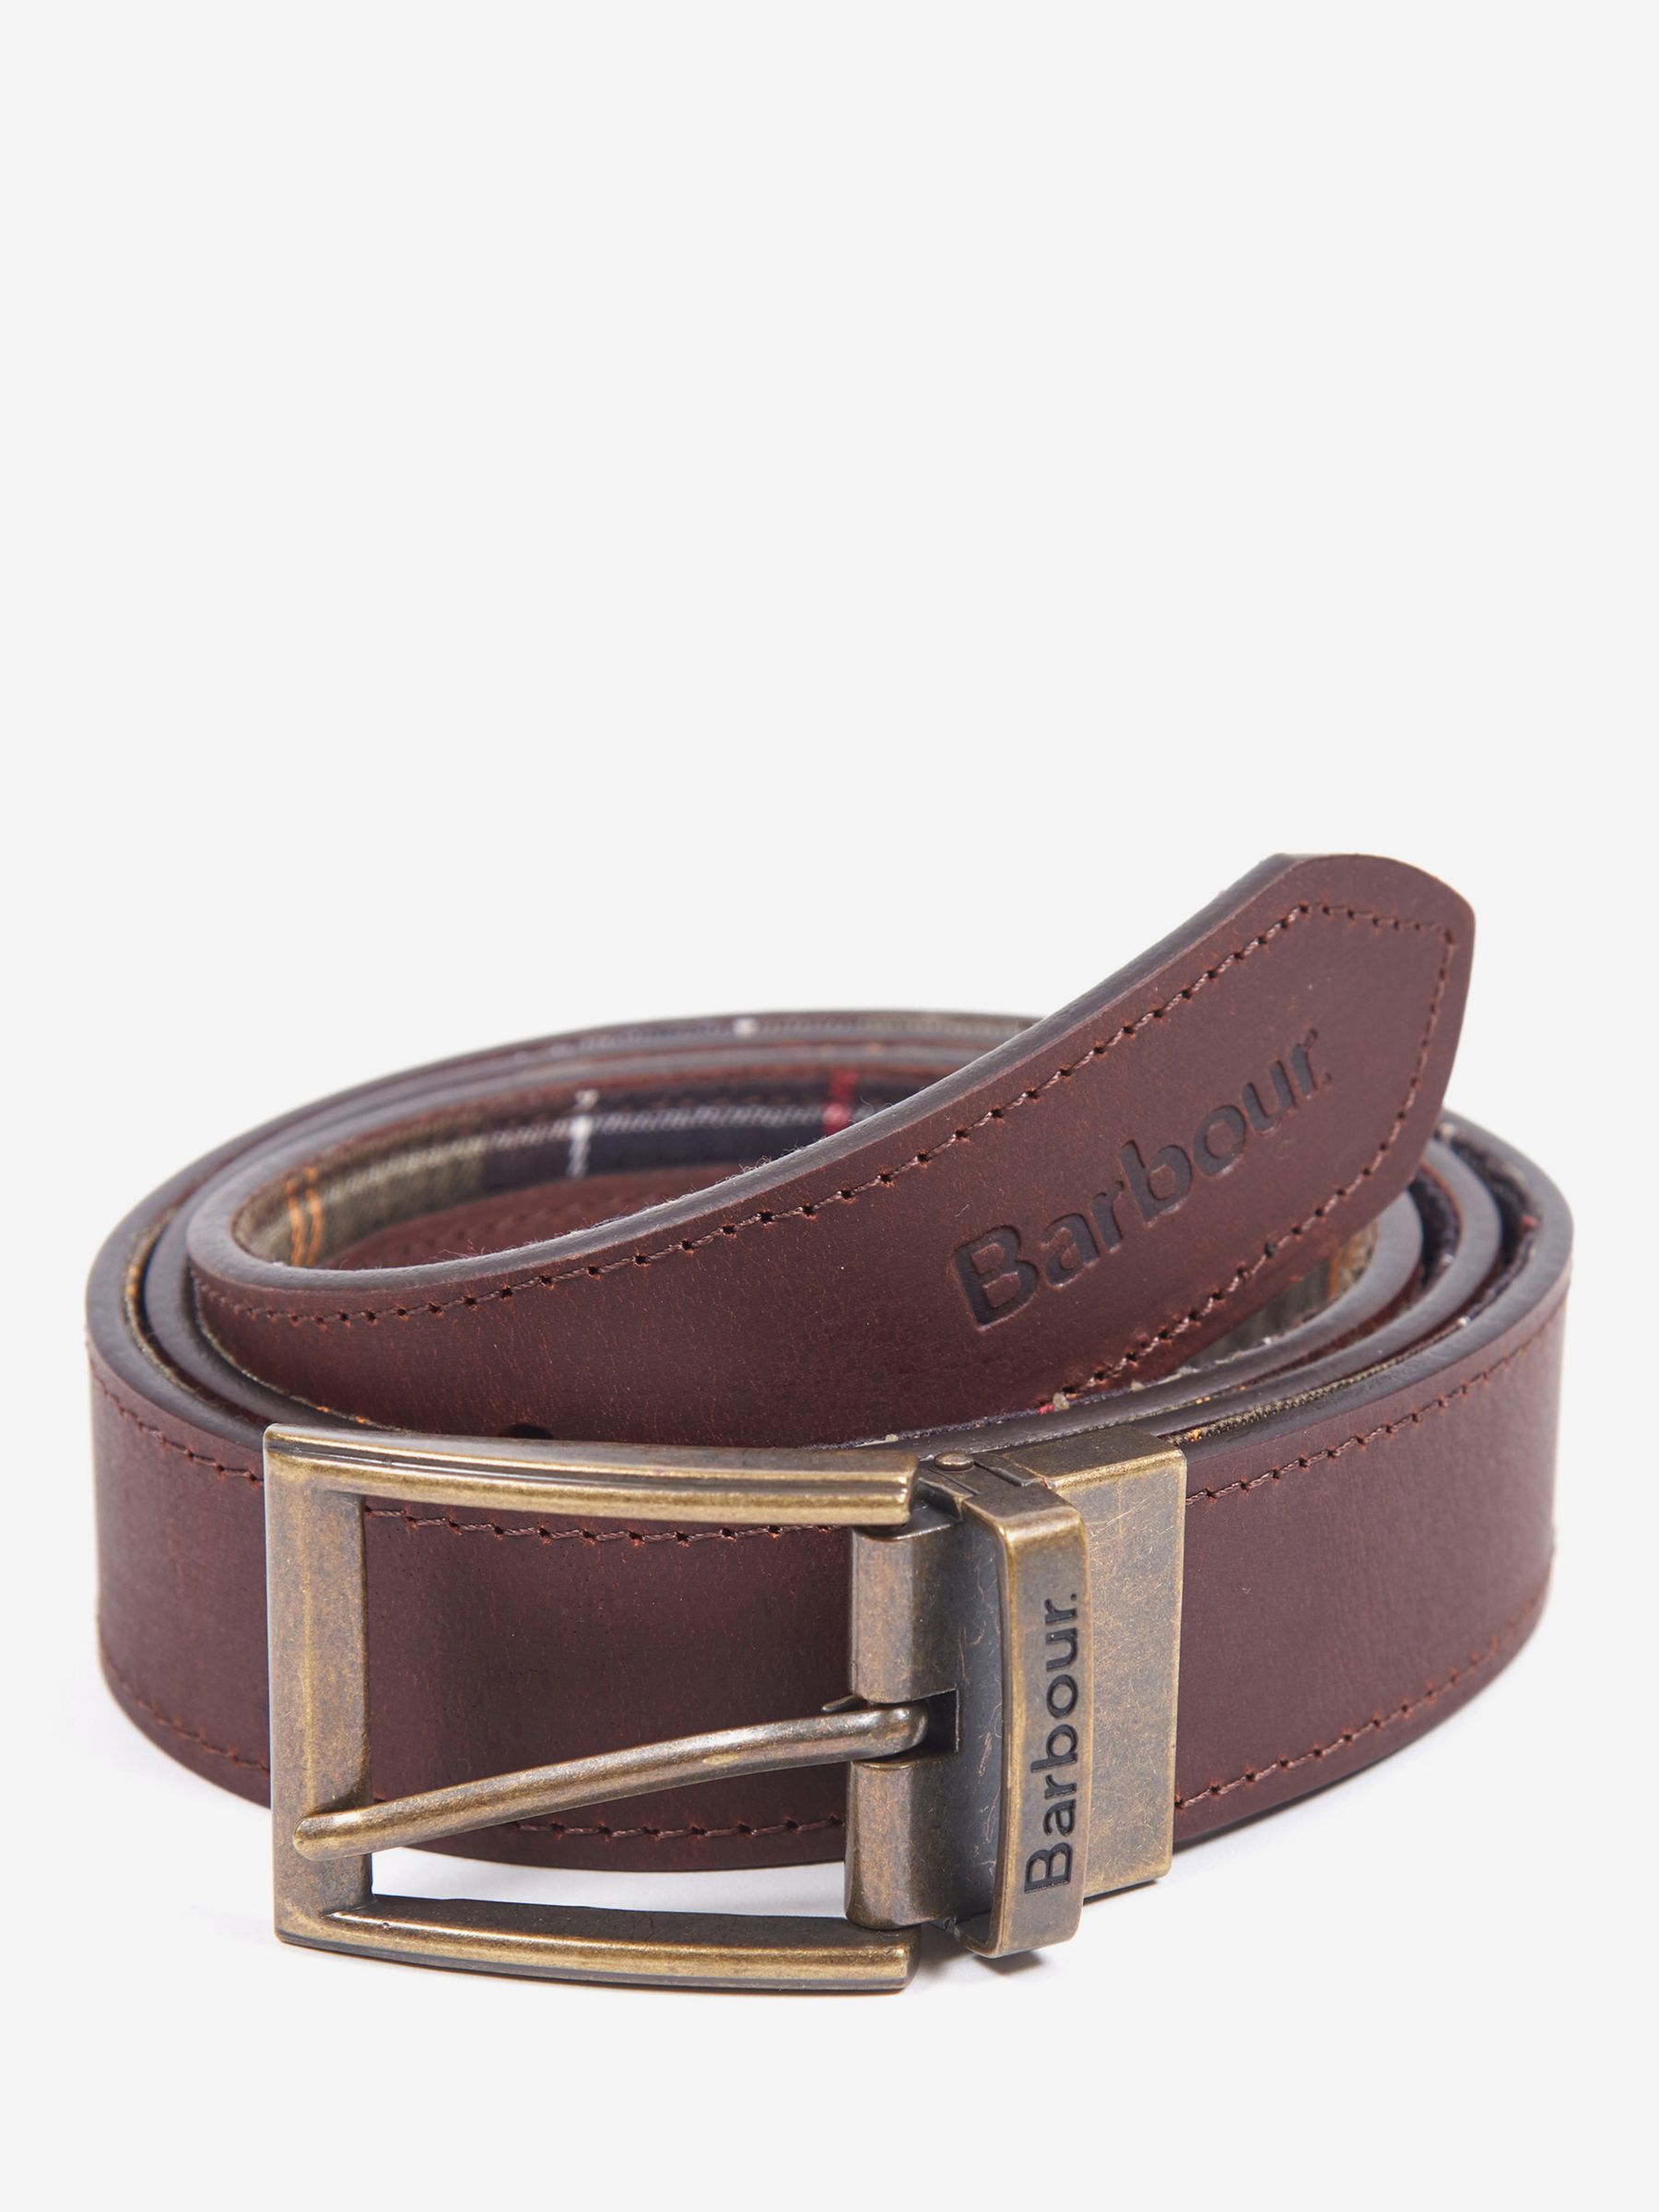 Barbour Reversible Leather Belt, Brown 